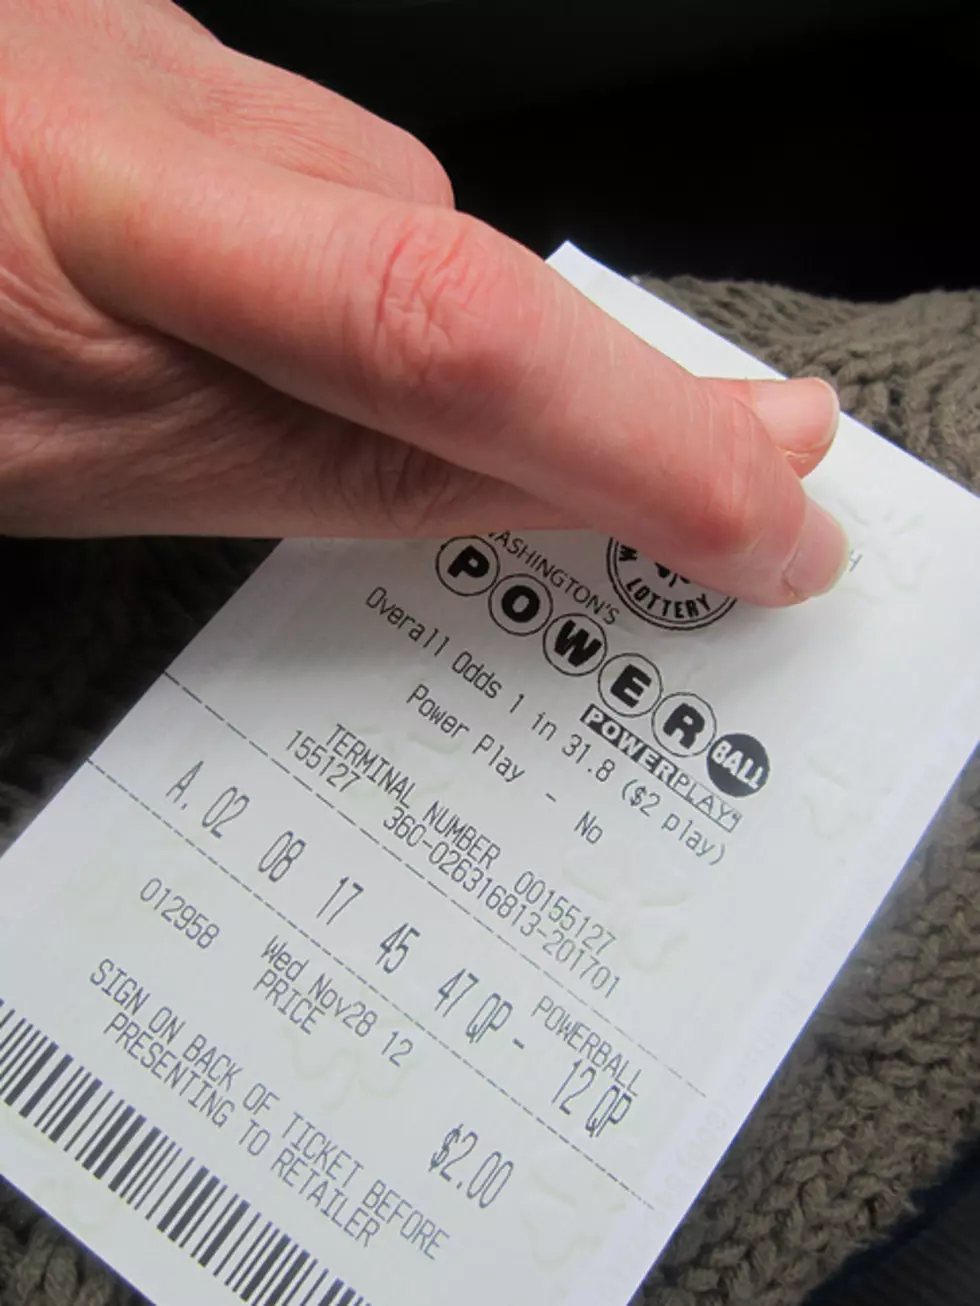 Things More Likely To Happen Than Winning The Powerball Jackpot